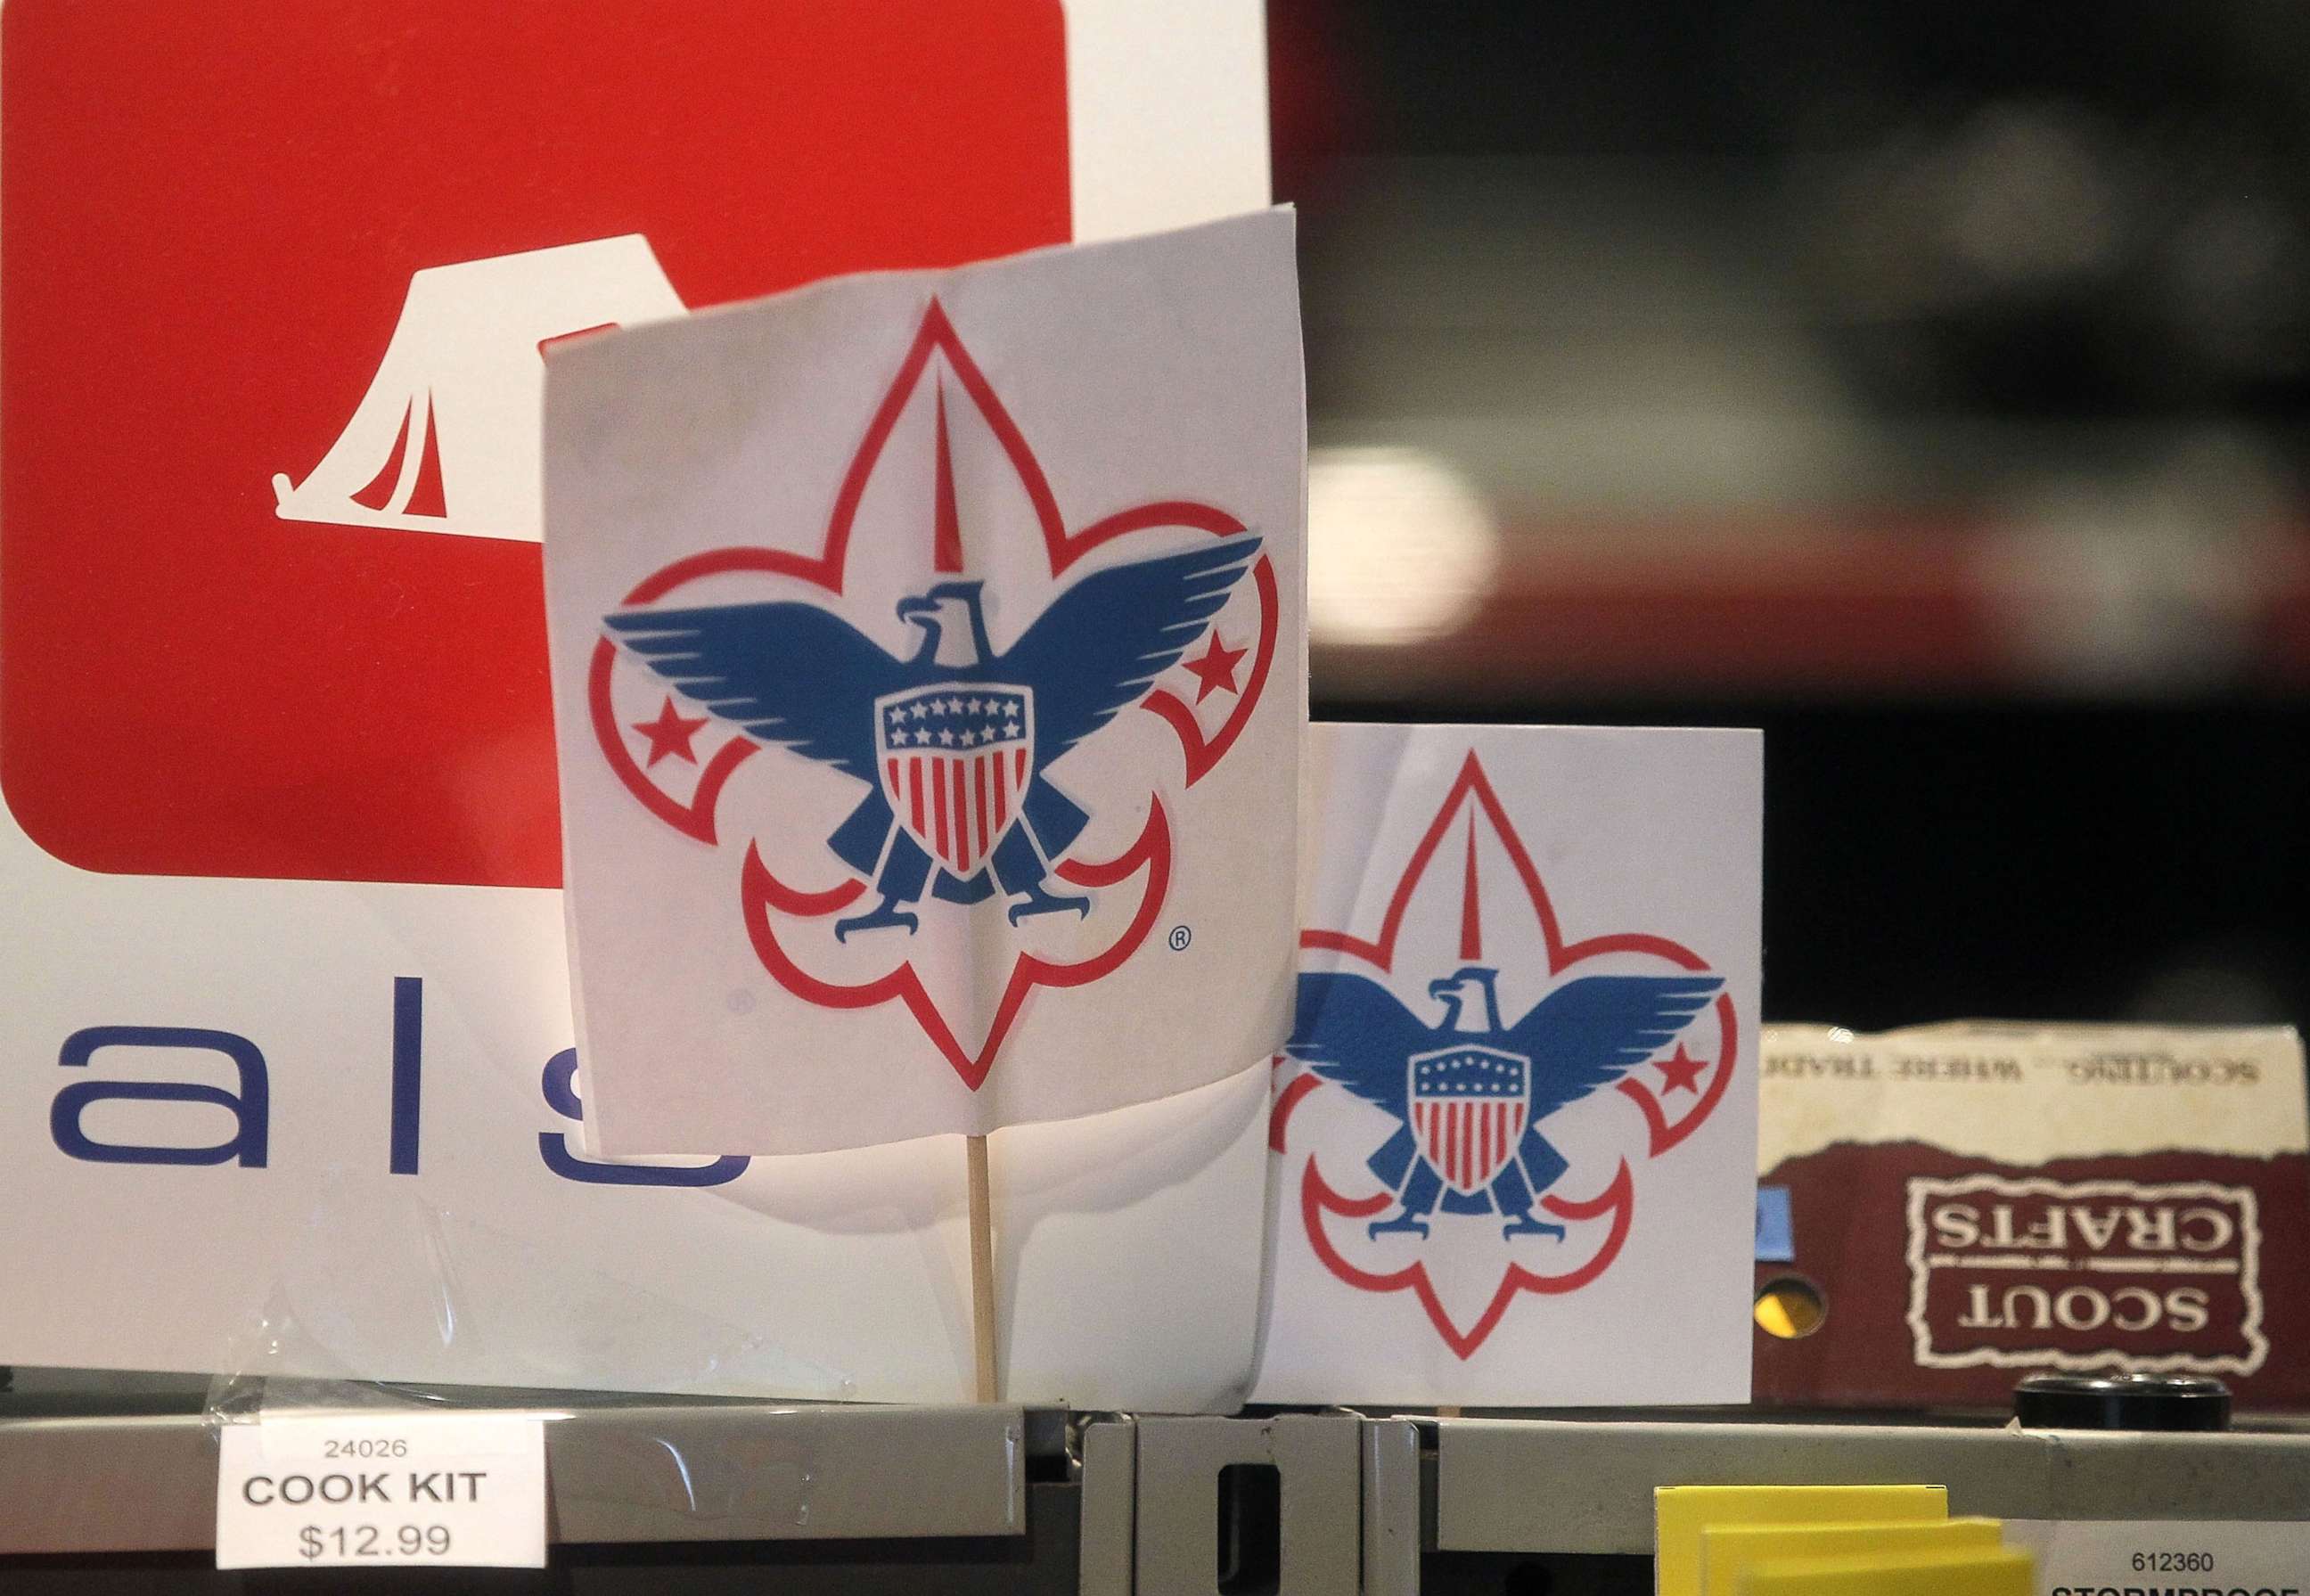 PHOTO: SIn this July 27, 2015, file photo, the Boy Scout logo is displayed in a store at the Marin Council of the Boy Scouts of America, in San Rafael, Calif.